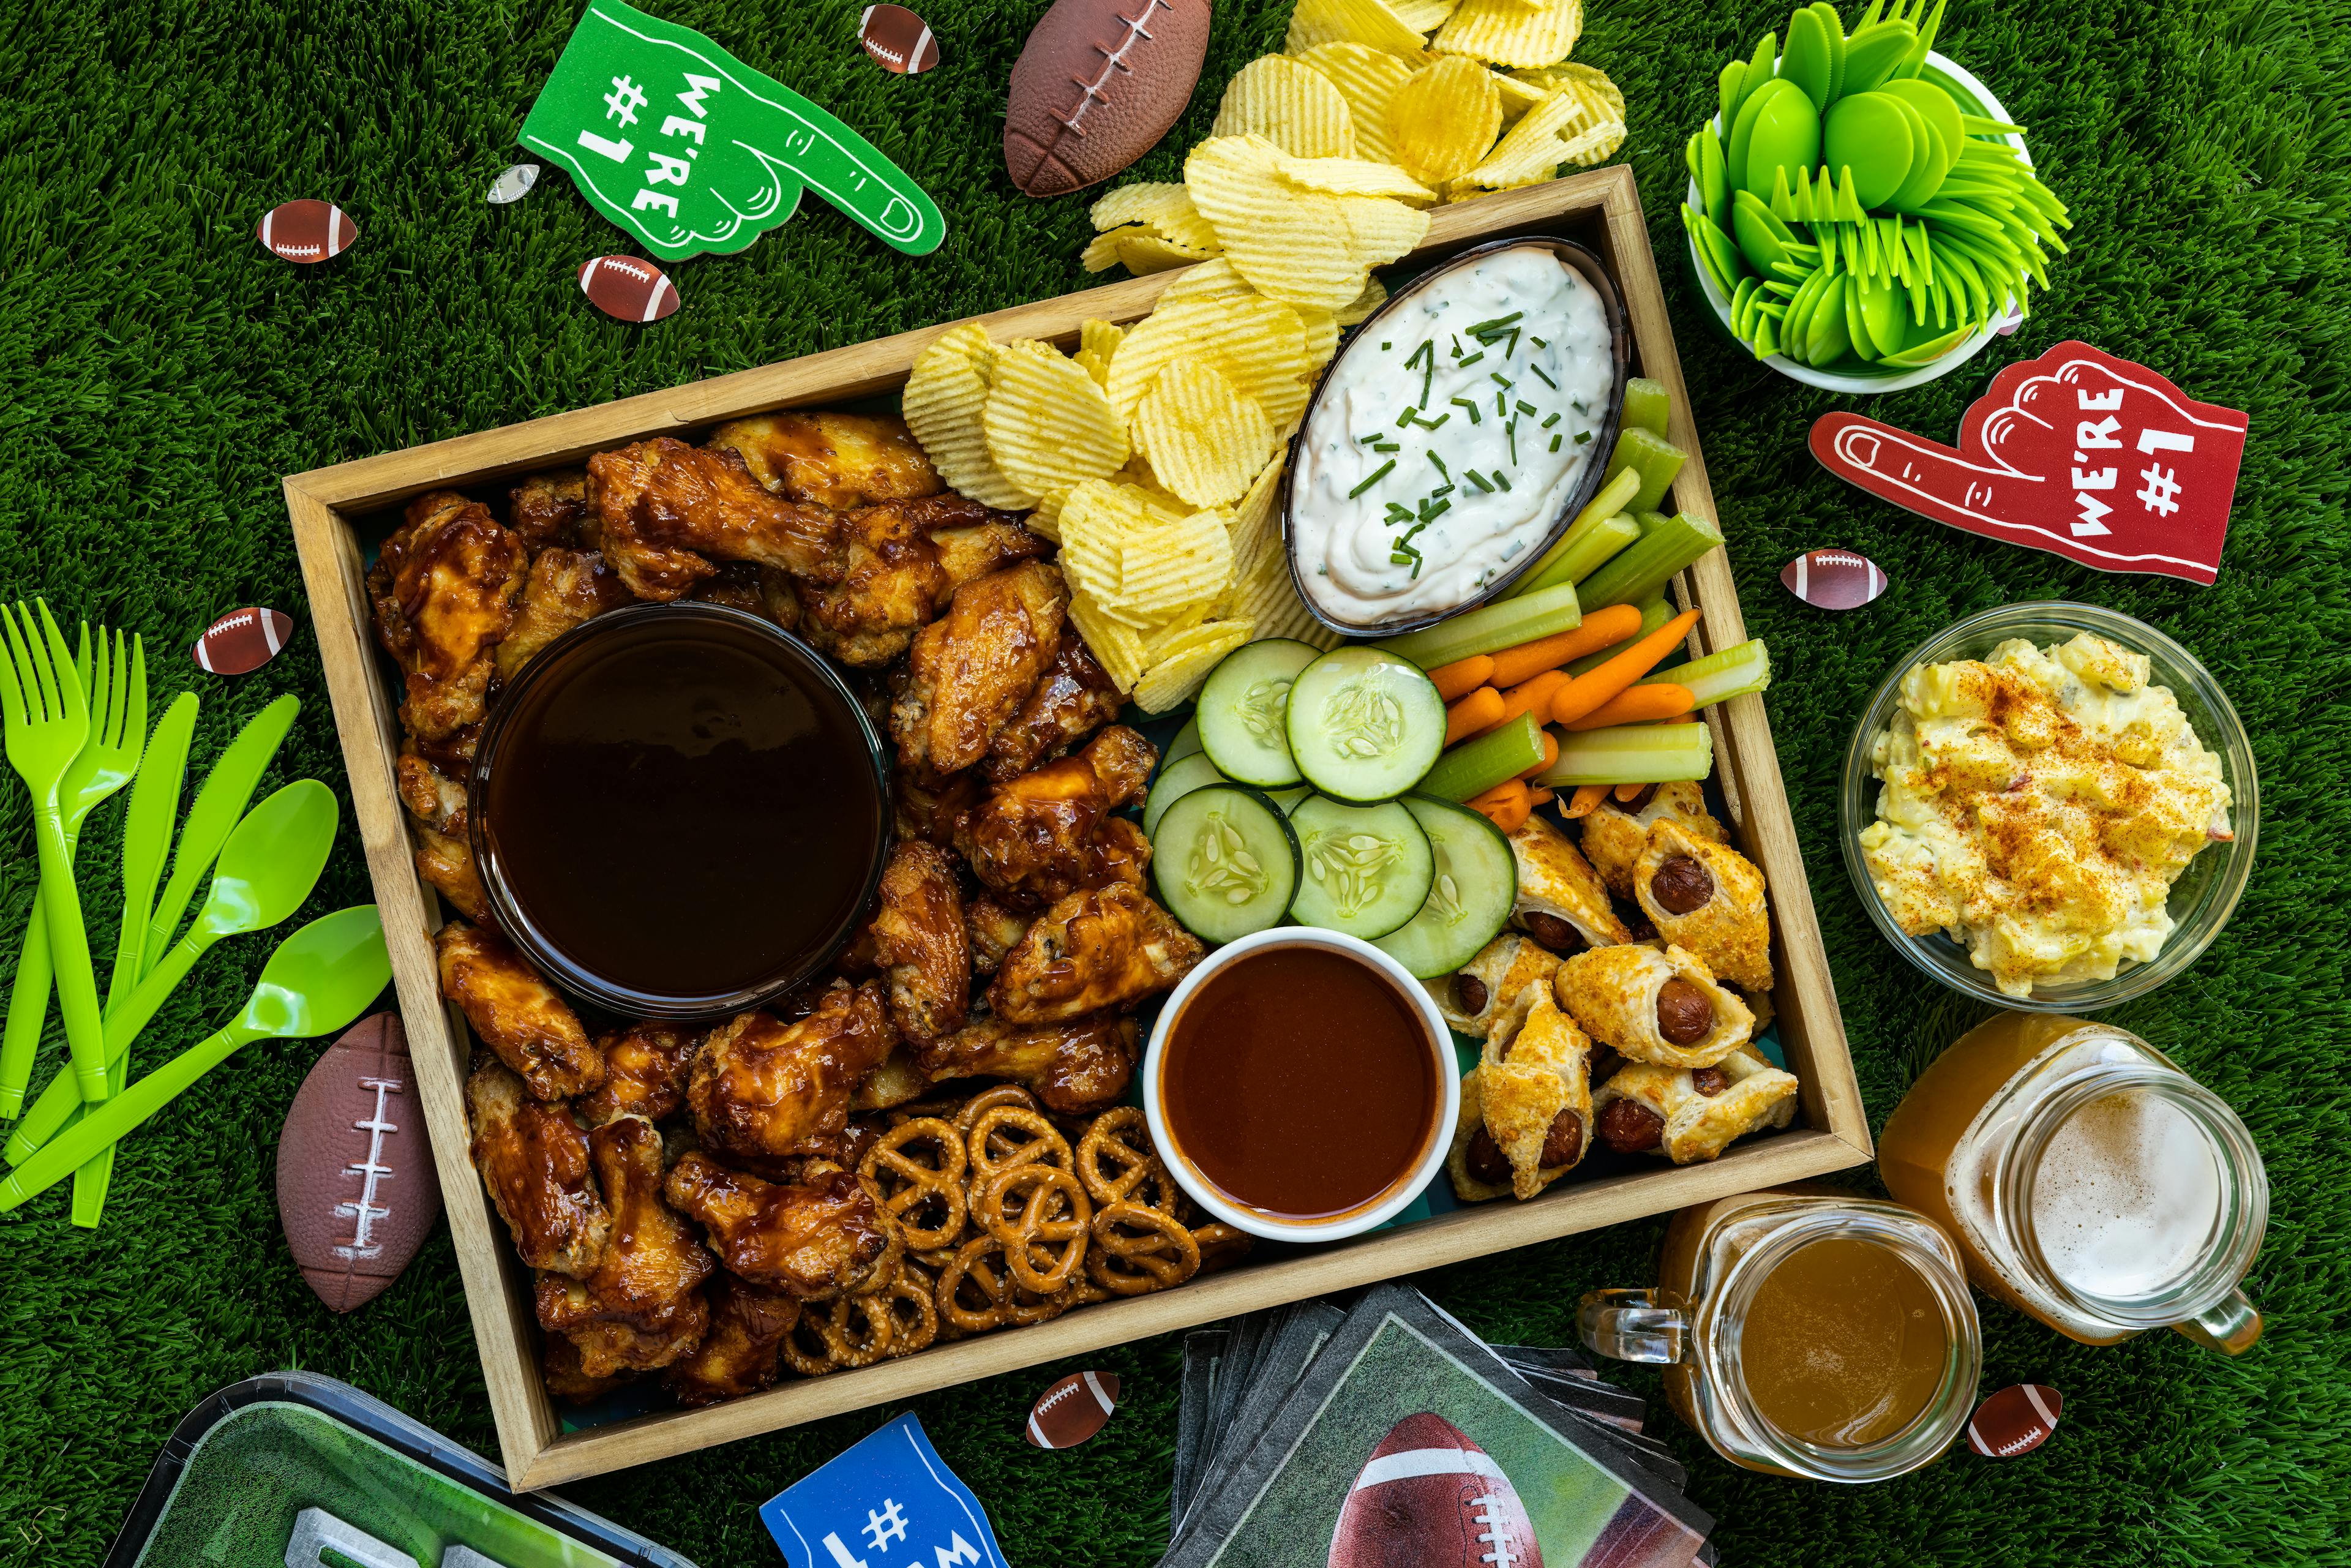 Overhead view of fun and healthy snacks and beer for fun celebrating game day with family and friends.